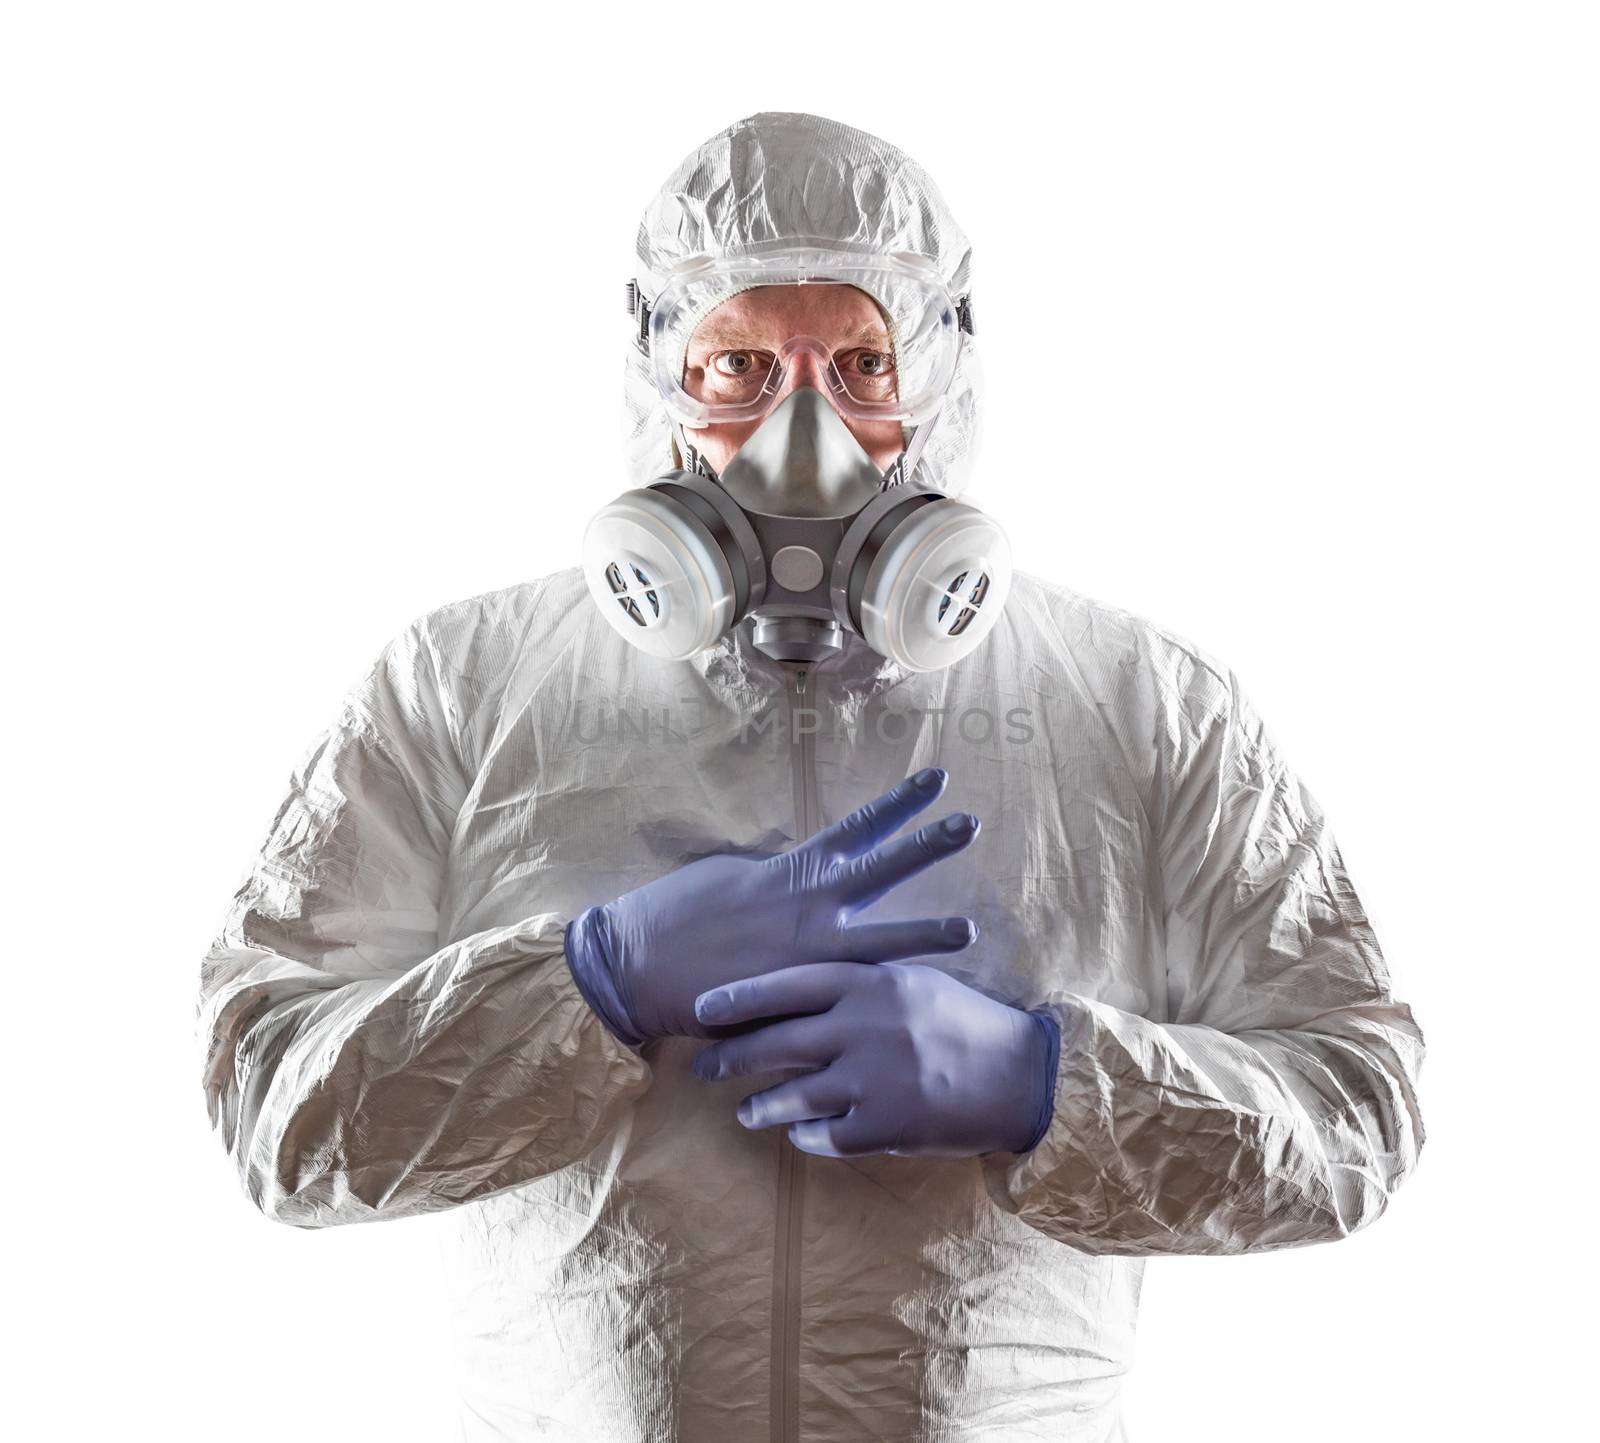 Man Wearing Hazmat Suit, Goggles and Gas Mask Isolated On White. by Feverpitched